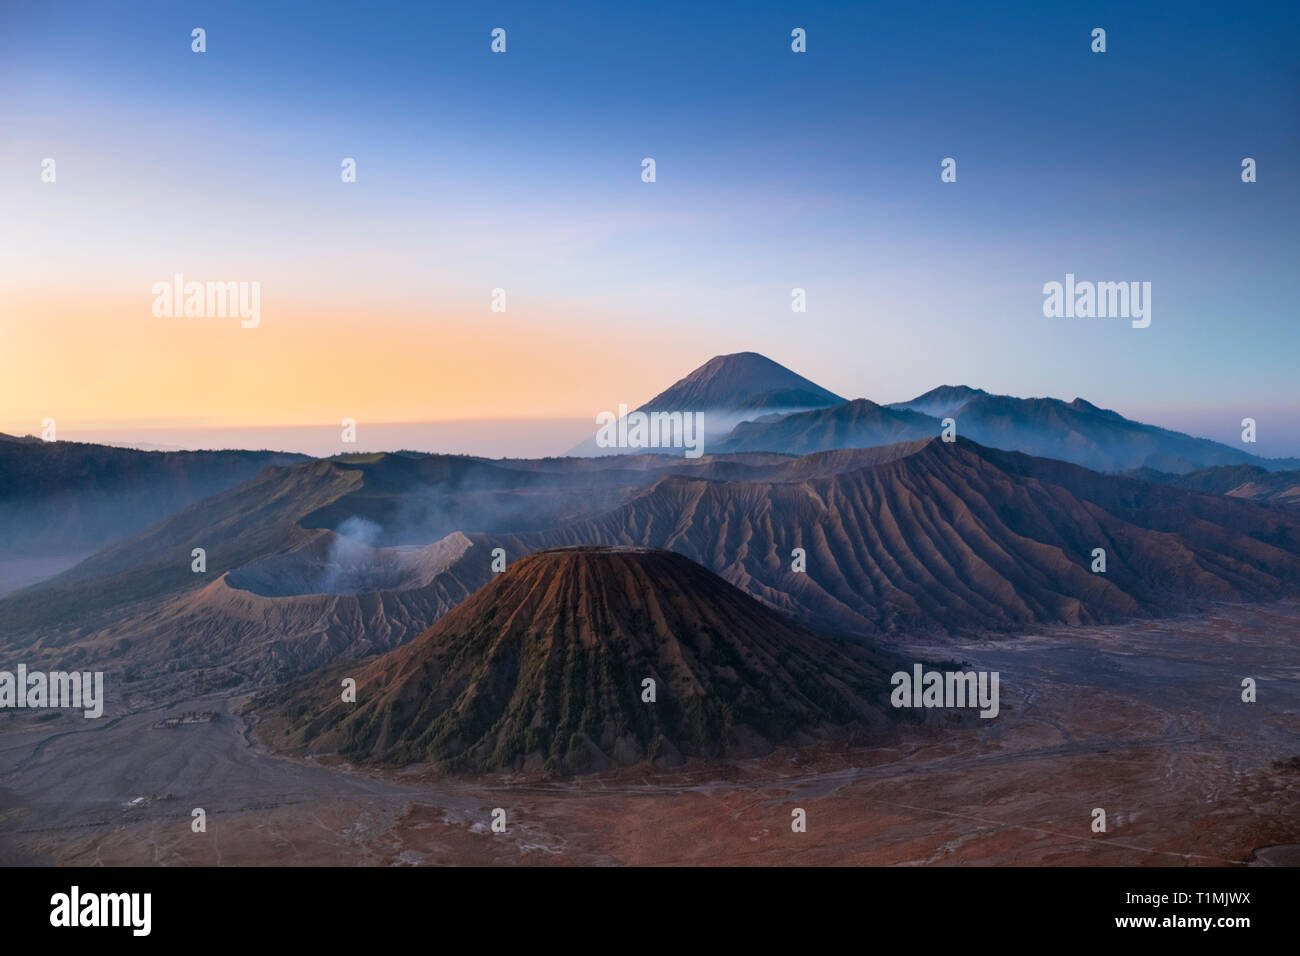 View of the volcanic landscape of Bromo Tengerr Semeru National Park showing the crater of Mount Bromo in the foreground Stock Photo